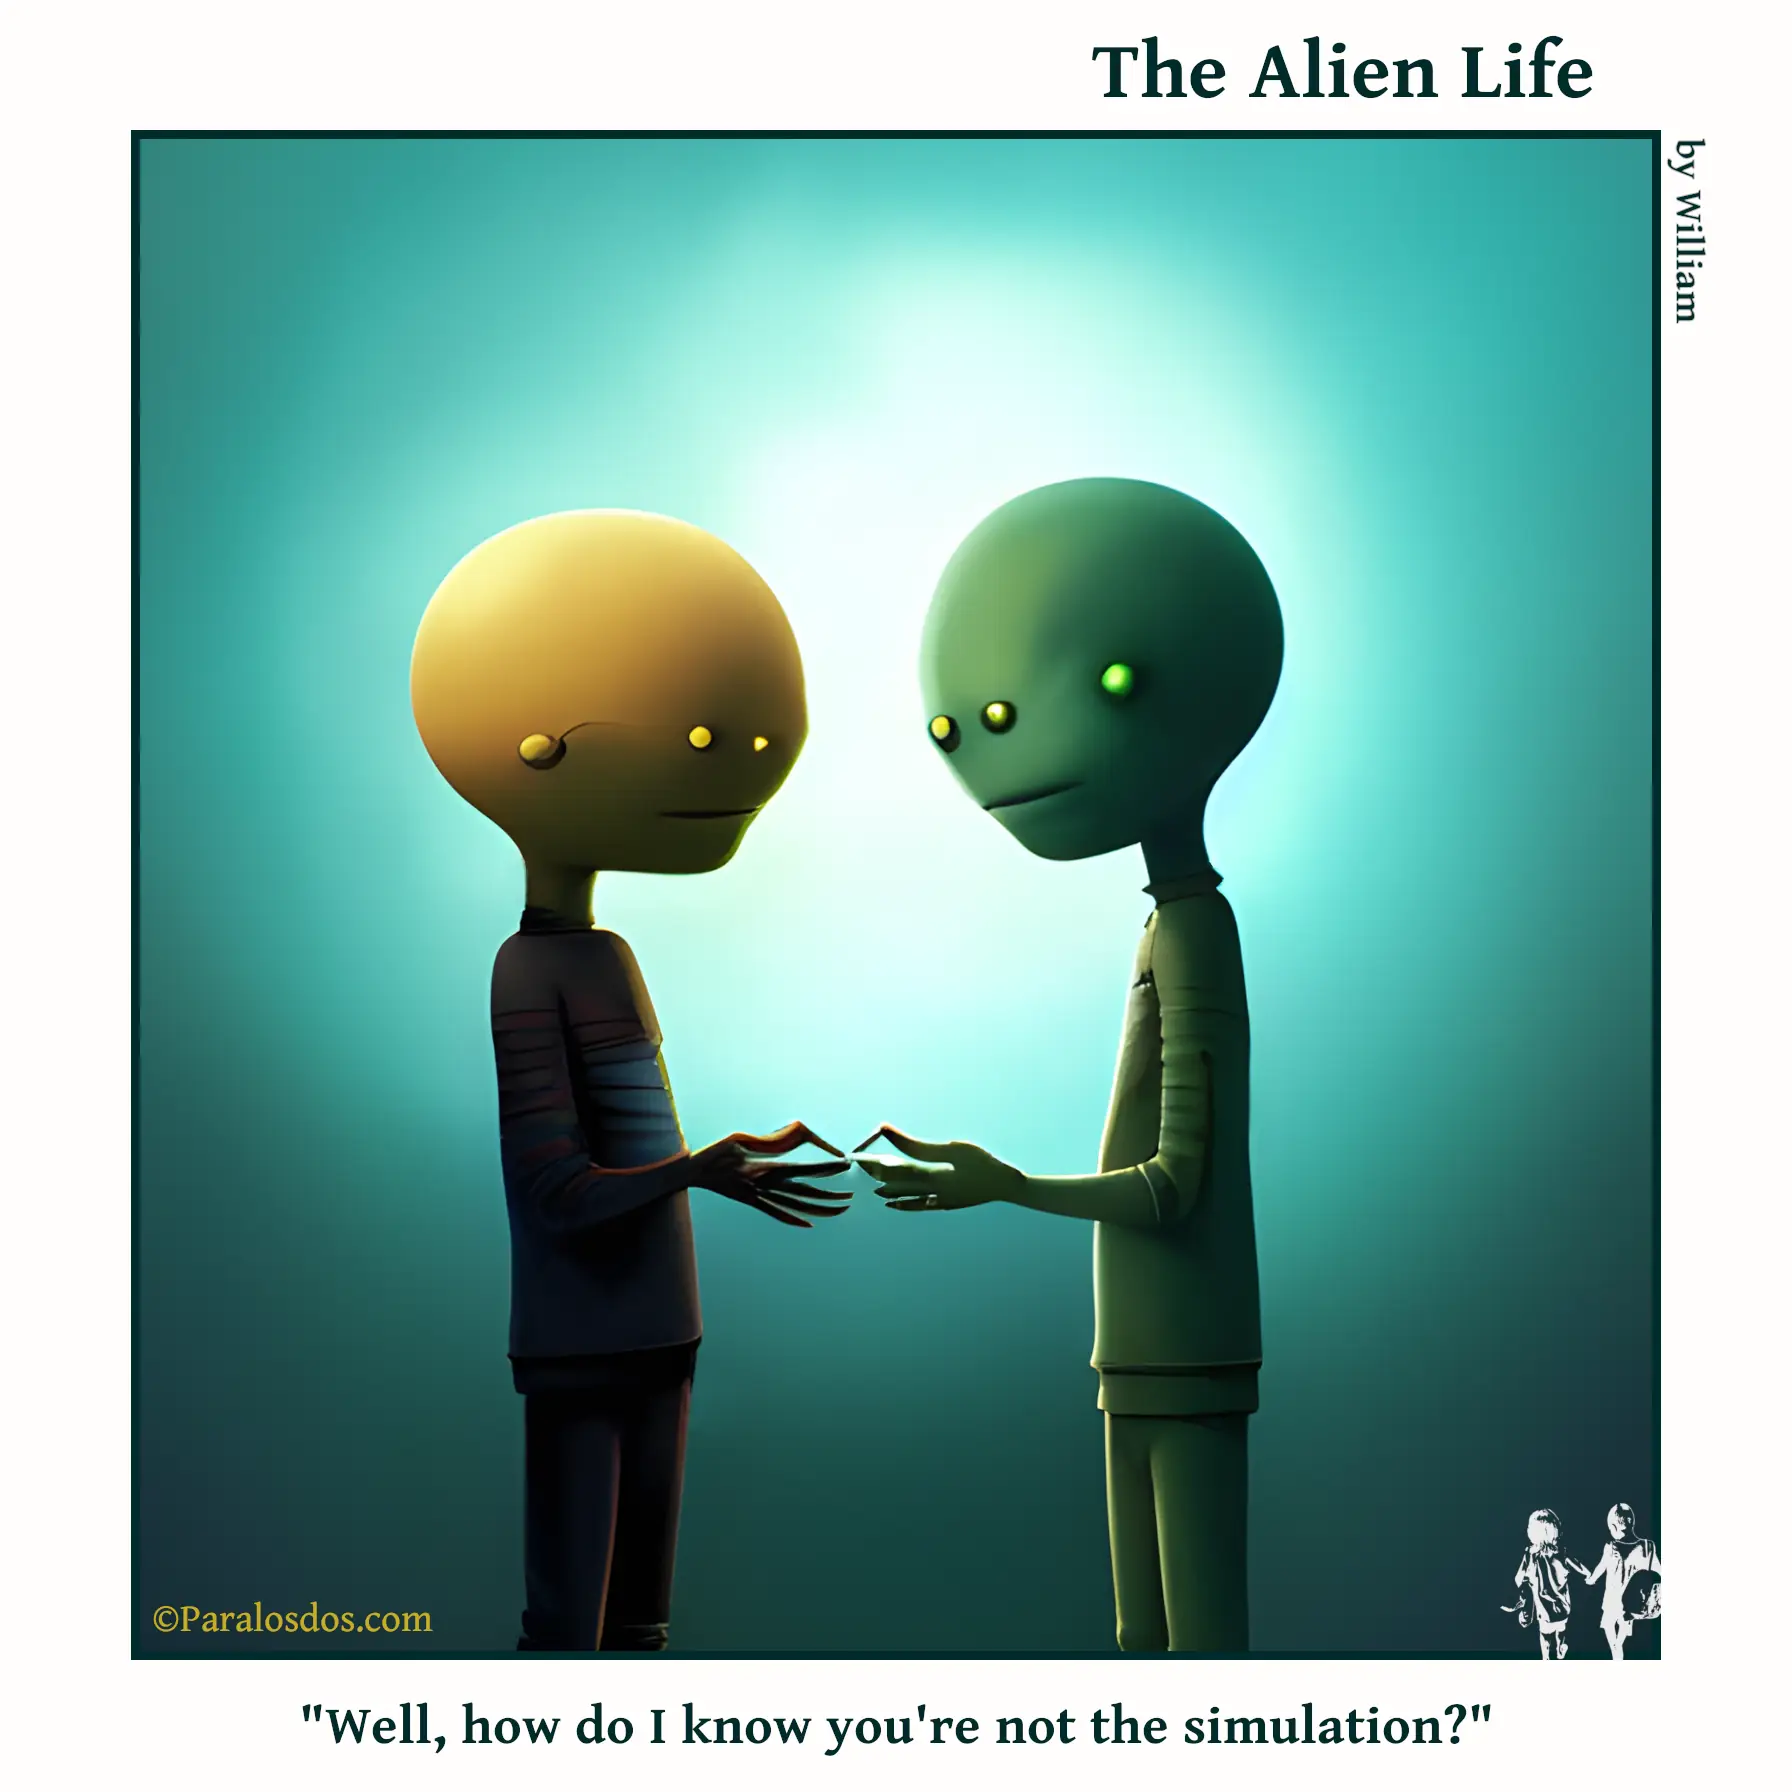 The Alien Life, one panel Comic. Two very similar looking aliens are mirroring each others pose. The caption reads: "Well, how do I know you're not the simulation?"